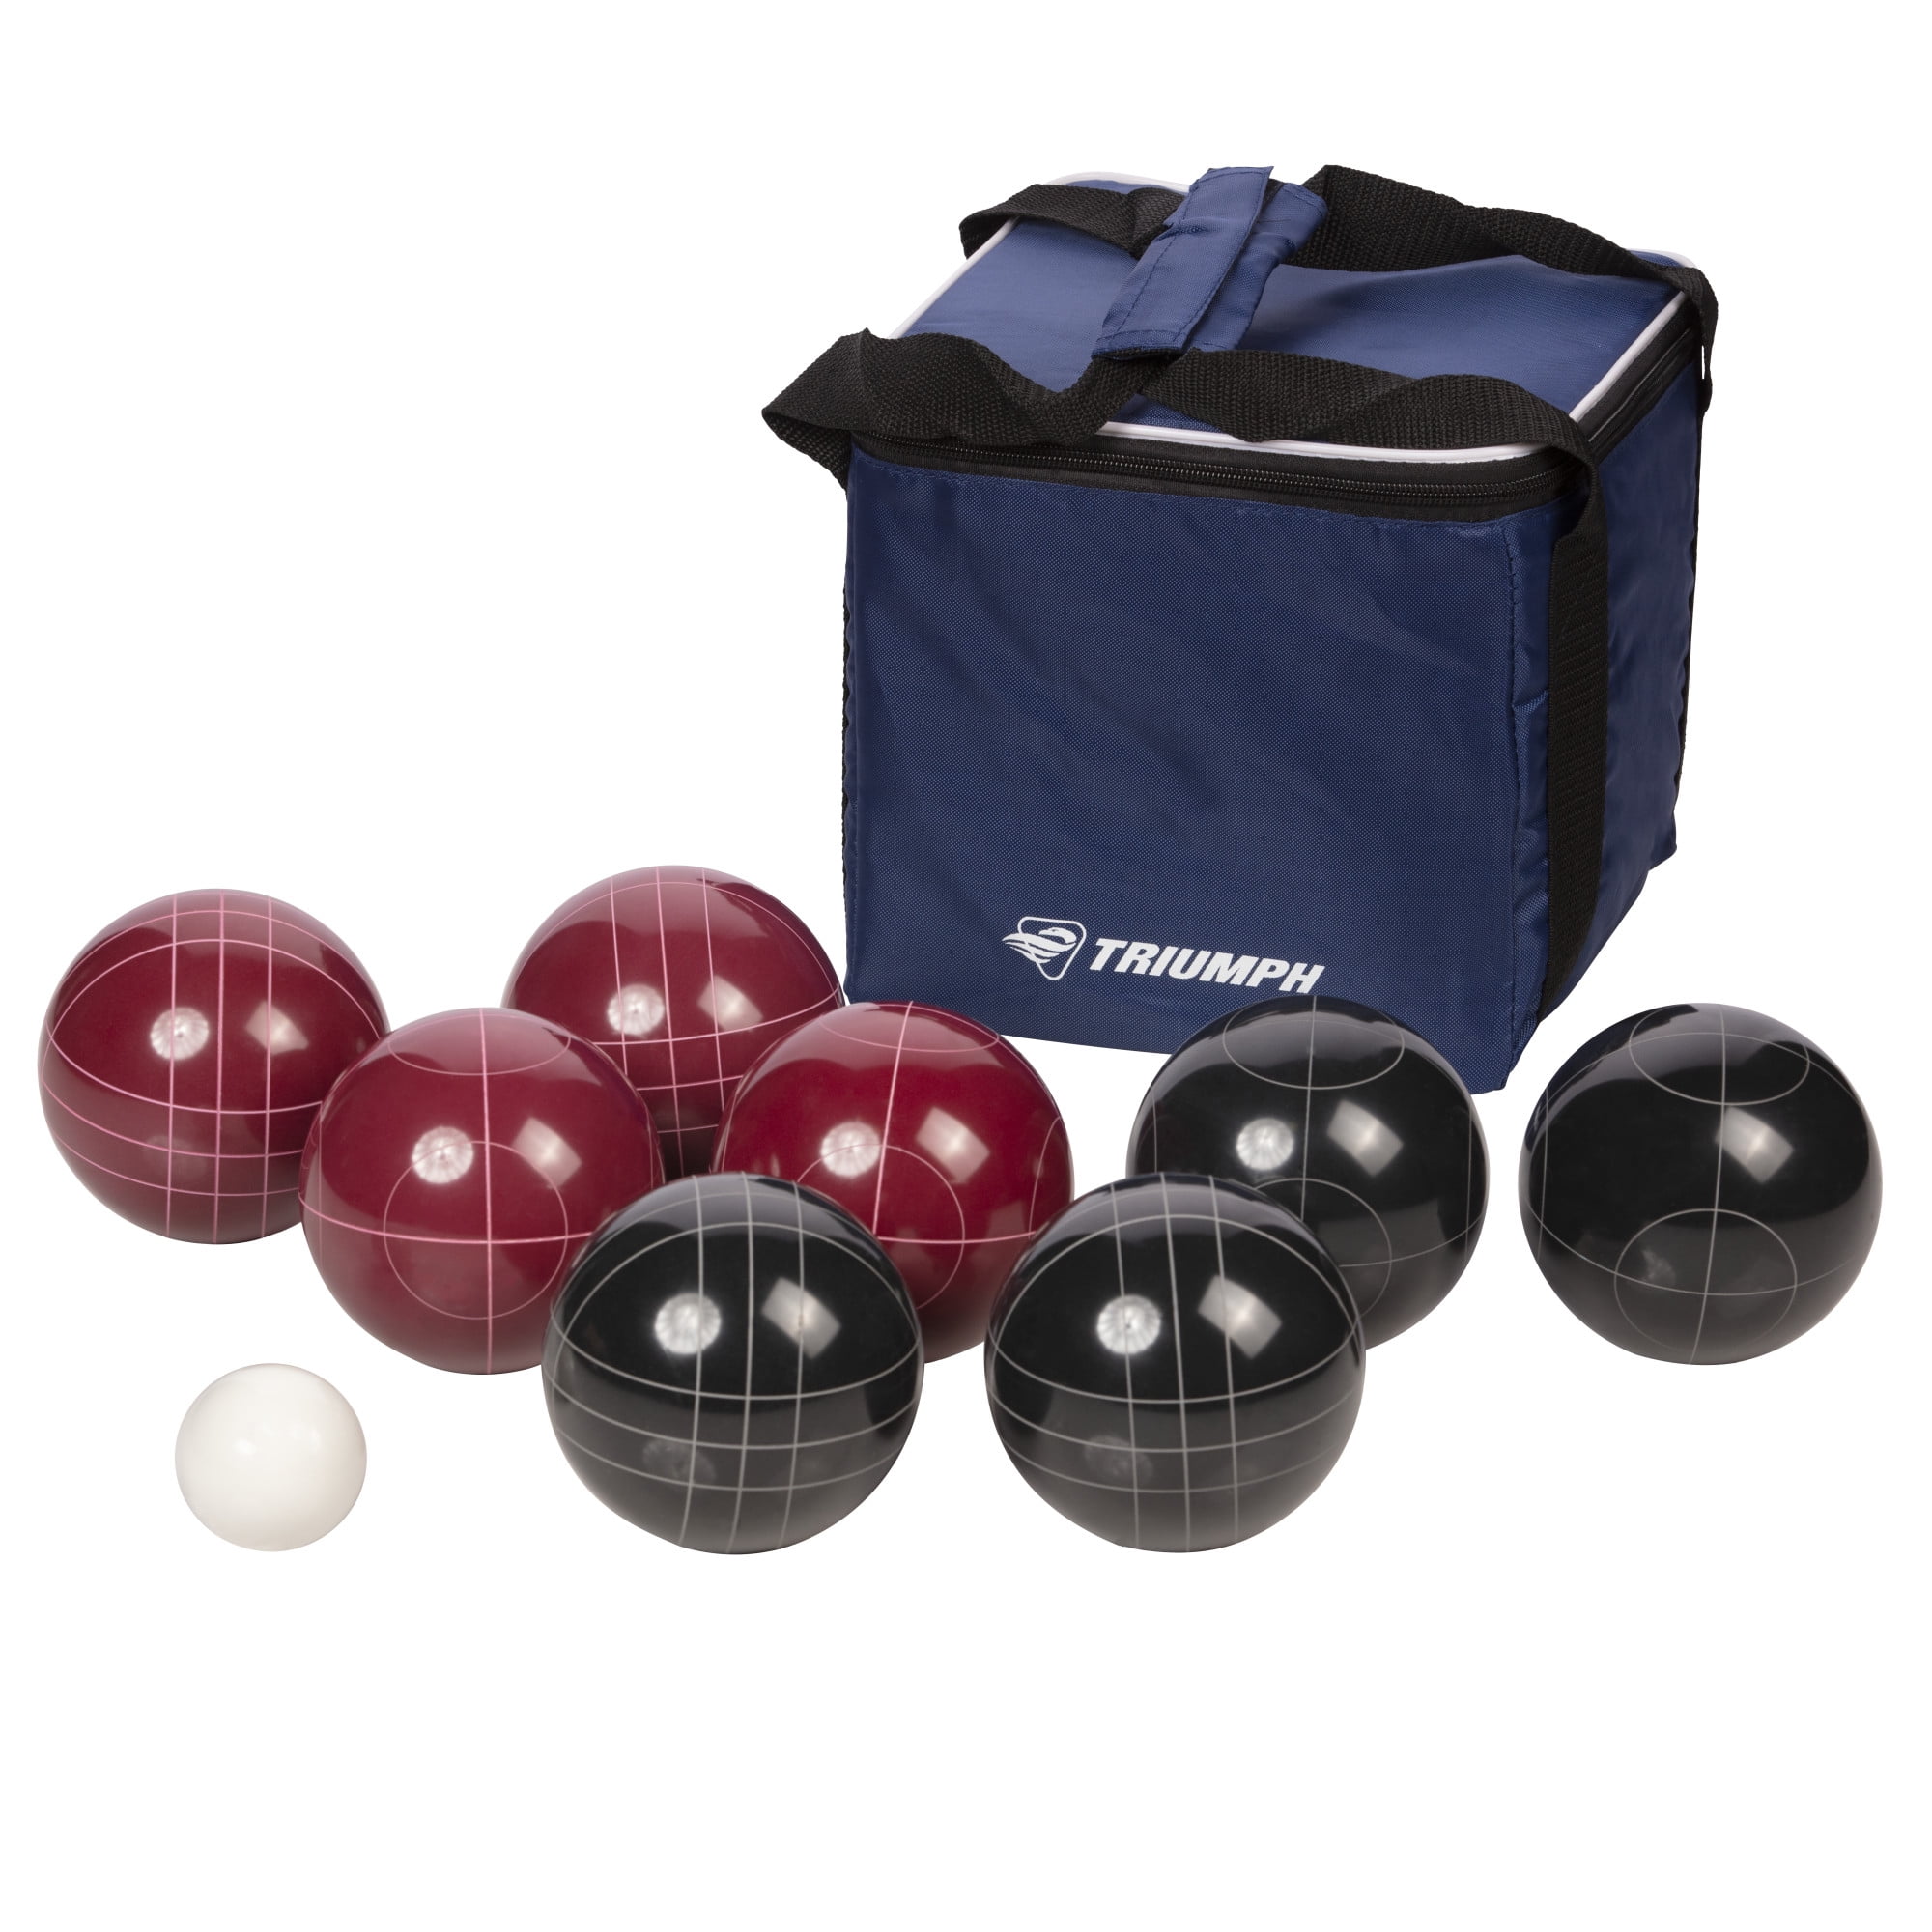 Triumph Competition 100mm Resin Bocce Ball Outdoor Game Set with Carrying Bag 